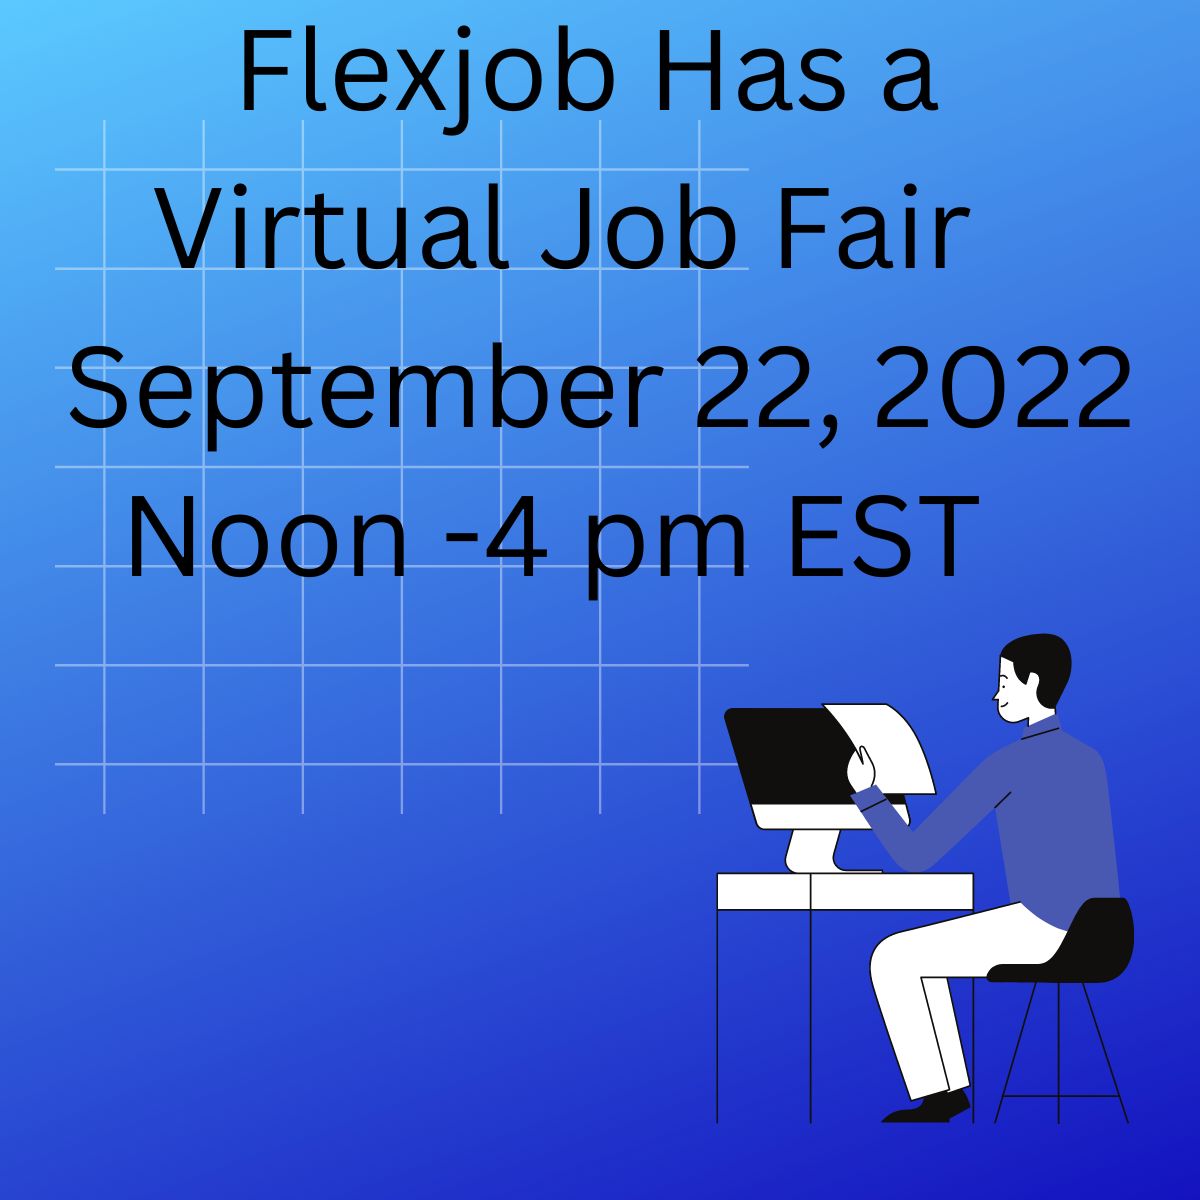 Person at a computer with the saying "Flexjob Has a Virtual Job Fair September 22, 2022 - Noon - 4 pm EST"